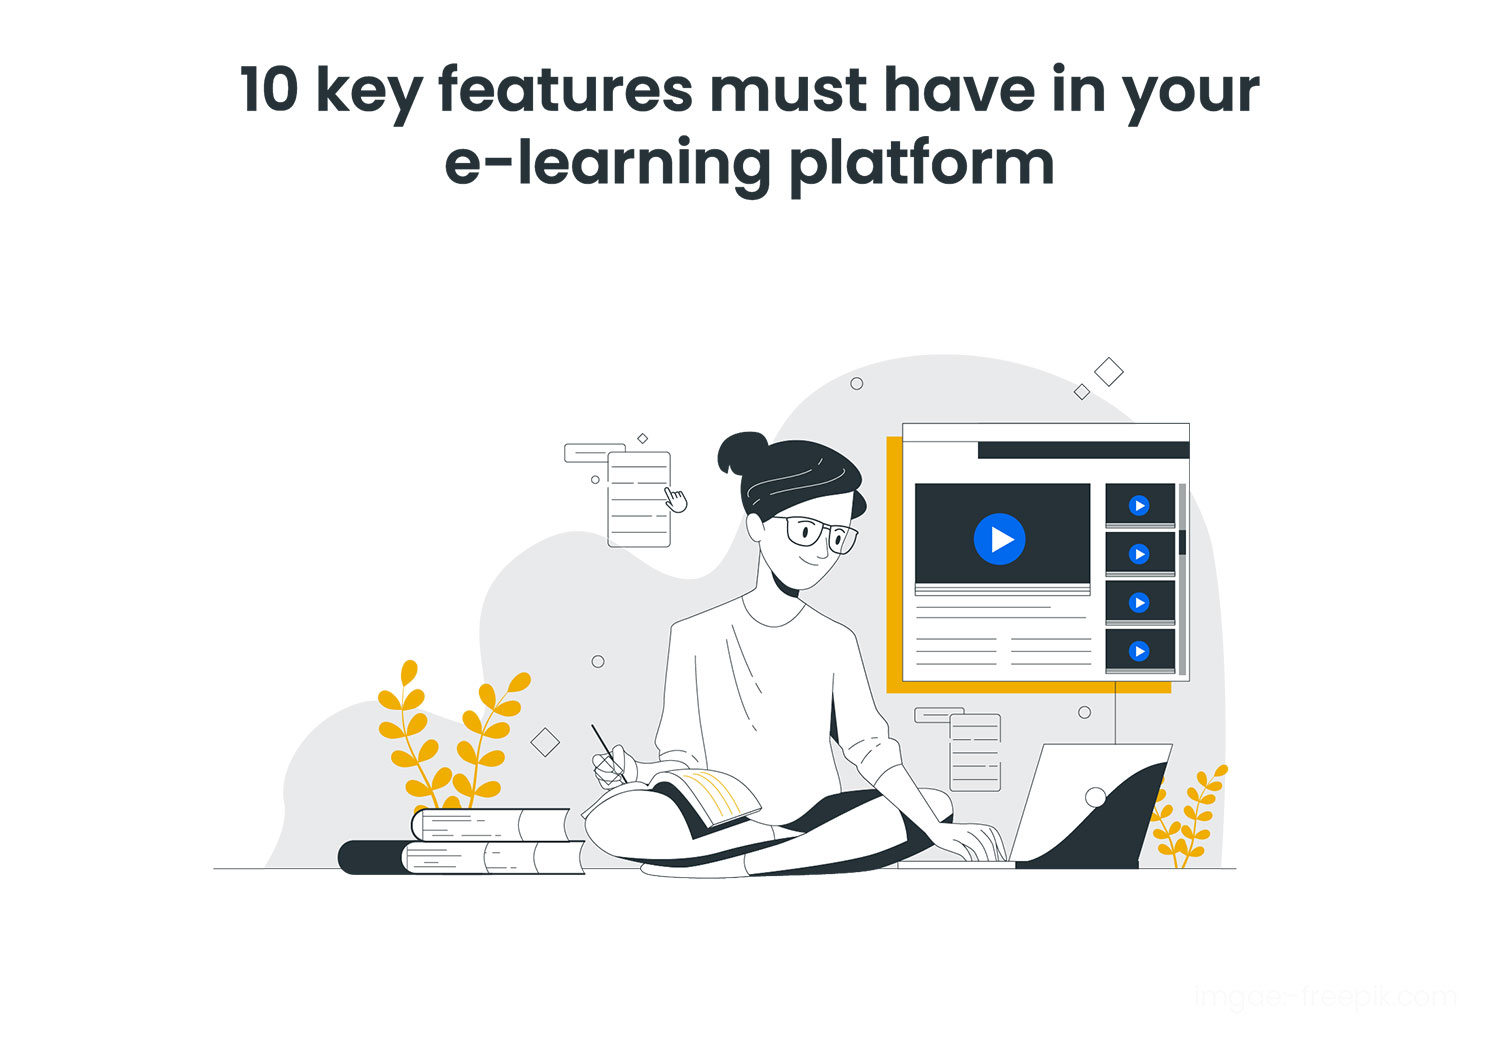 10 key features must have in your e-learning platform